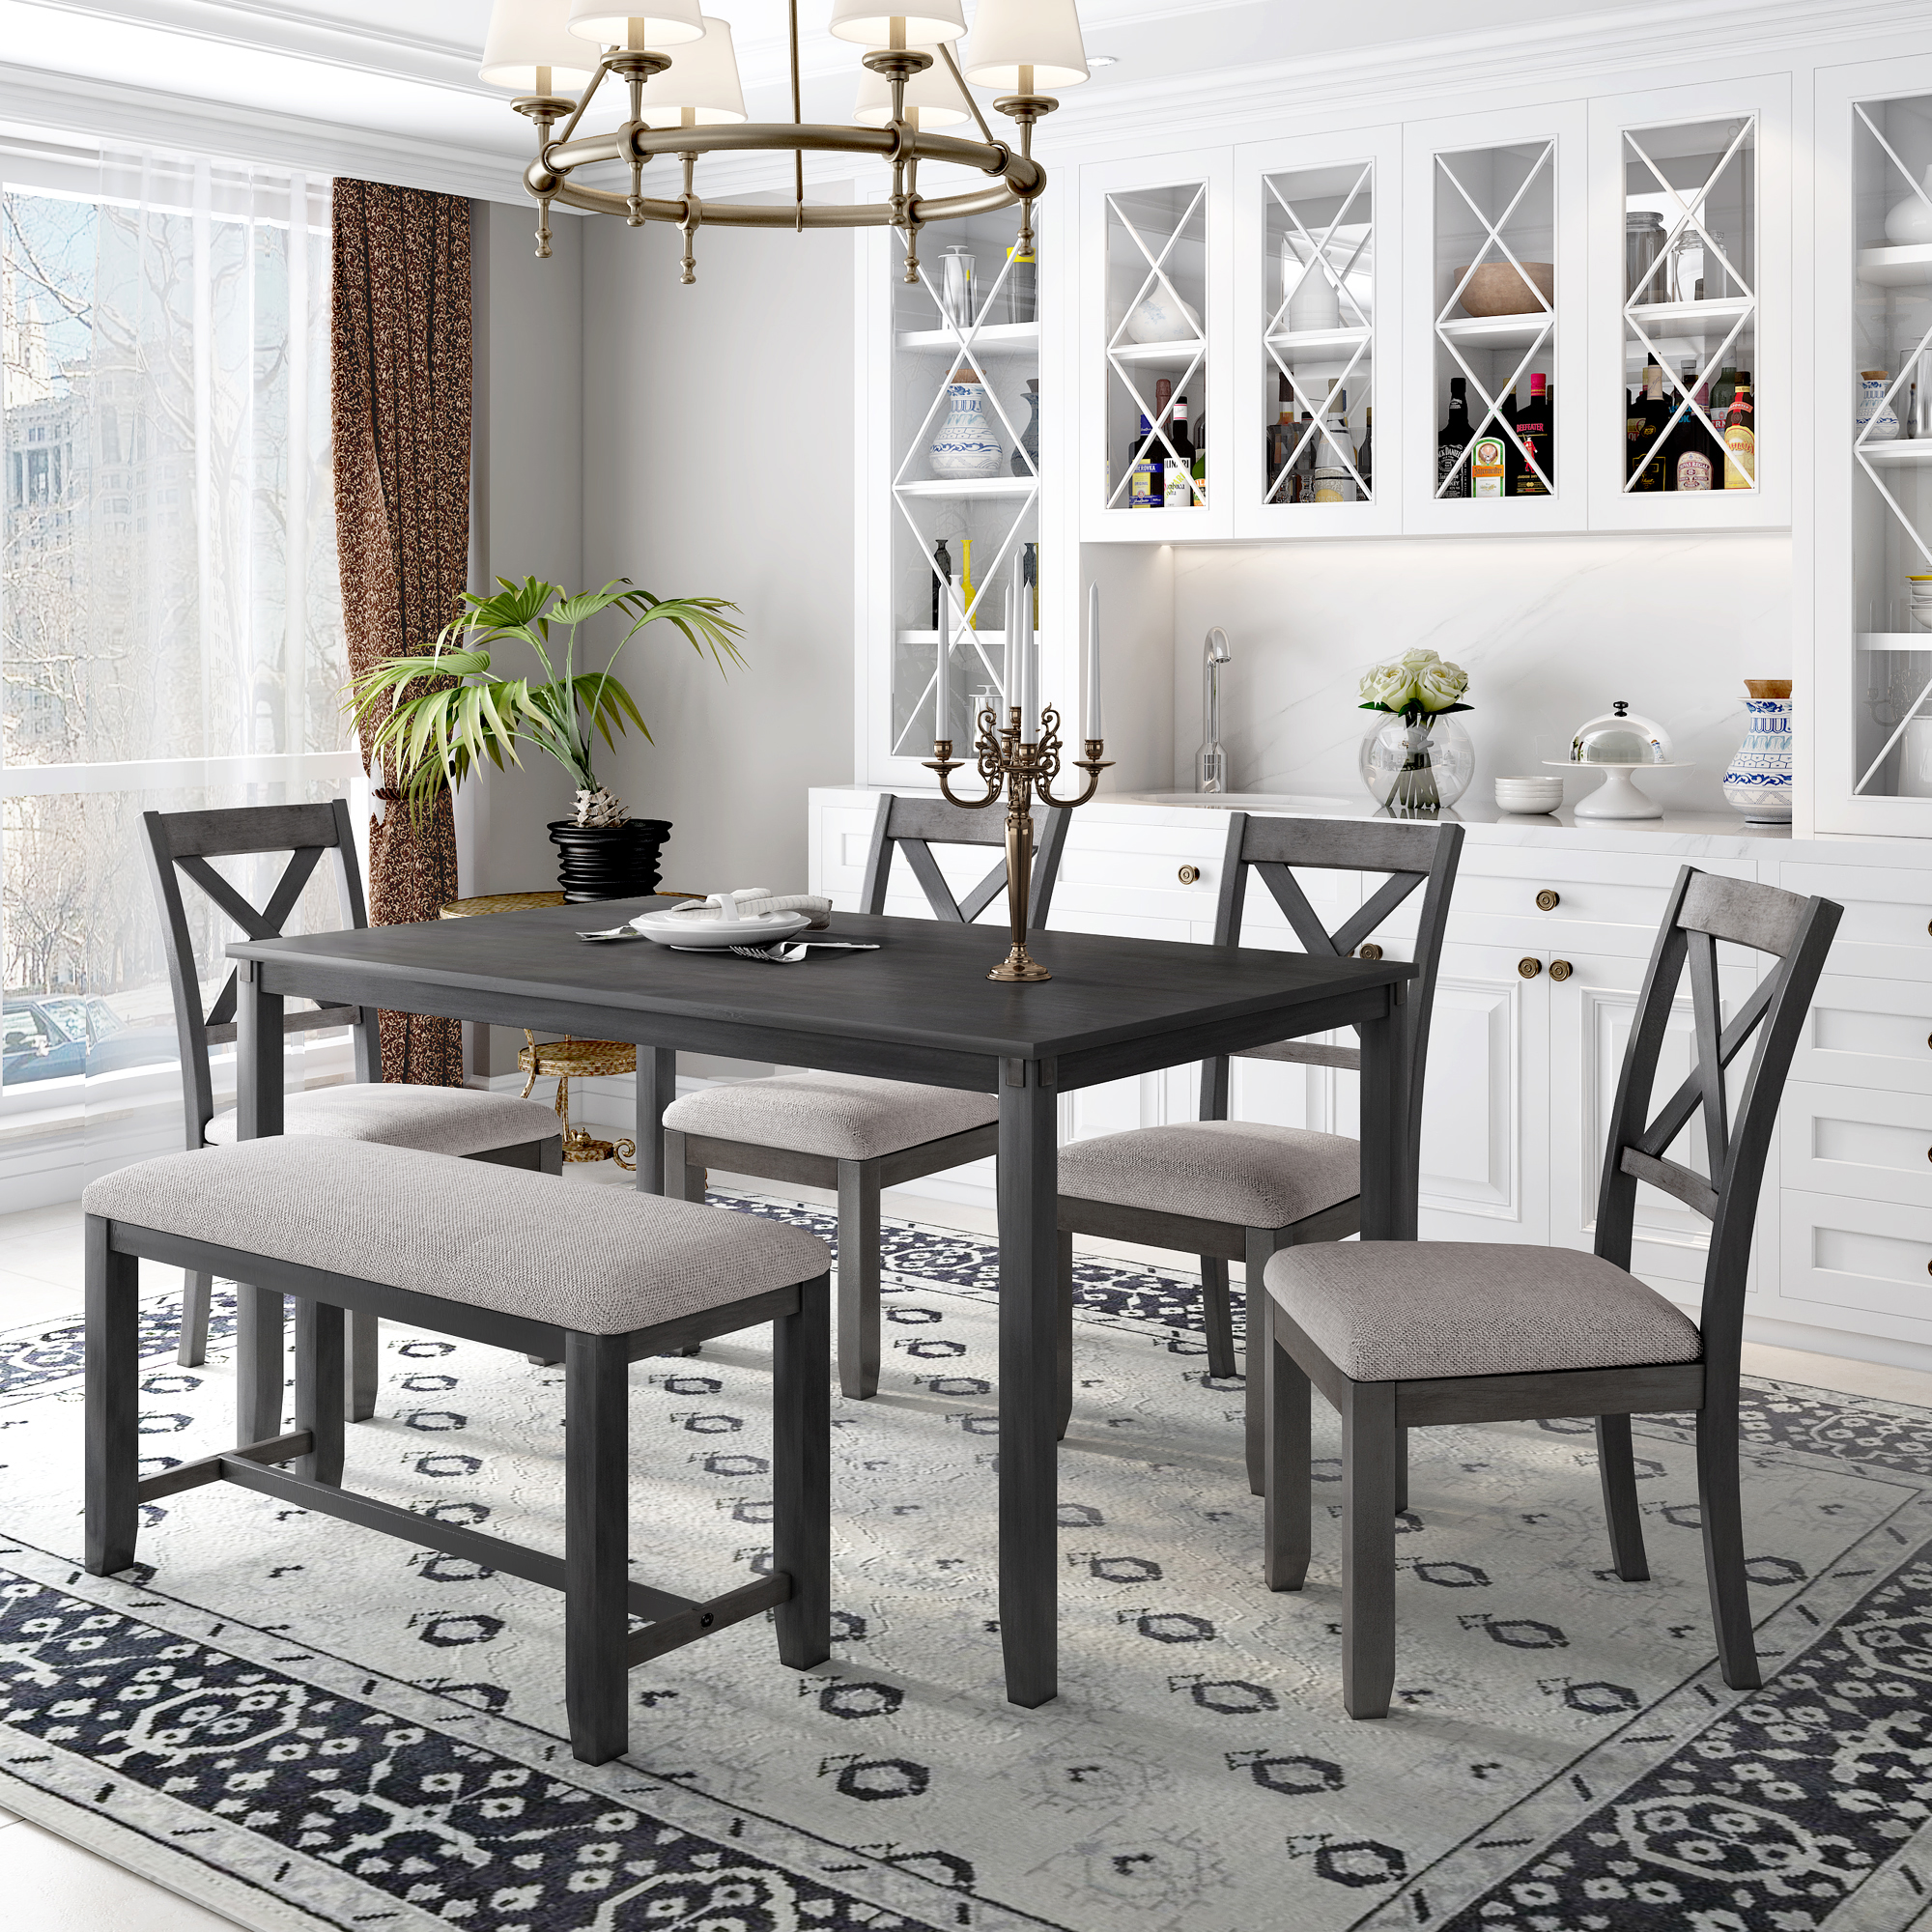 TREXM 6-Piece Kitchen Dining Table Set Wooden Rectangular Dining Table, 4 Dining Chair and Bench Family Furniture (Grey)-CASAINC